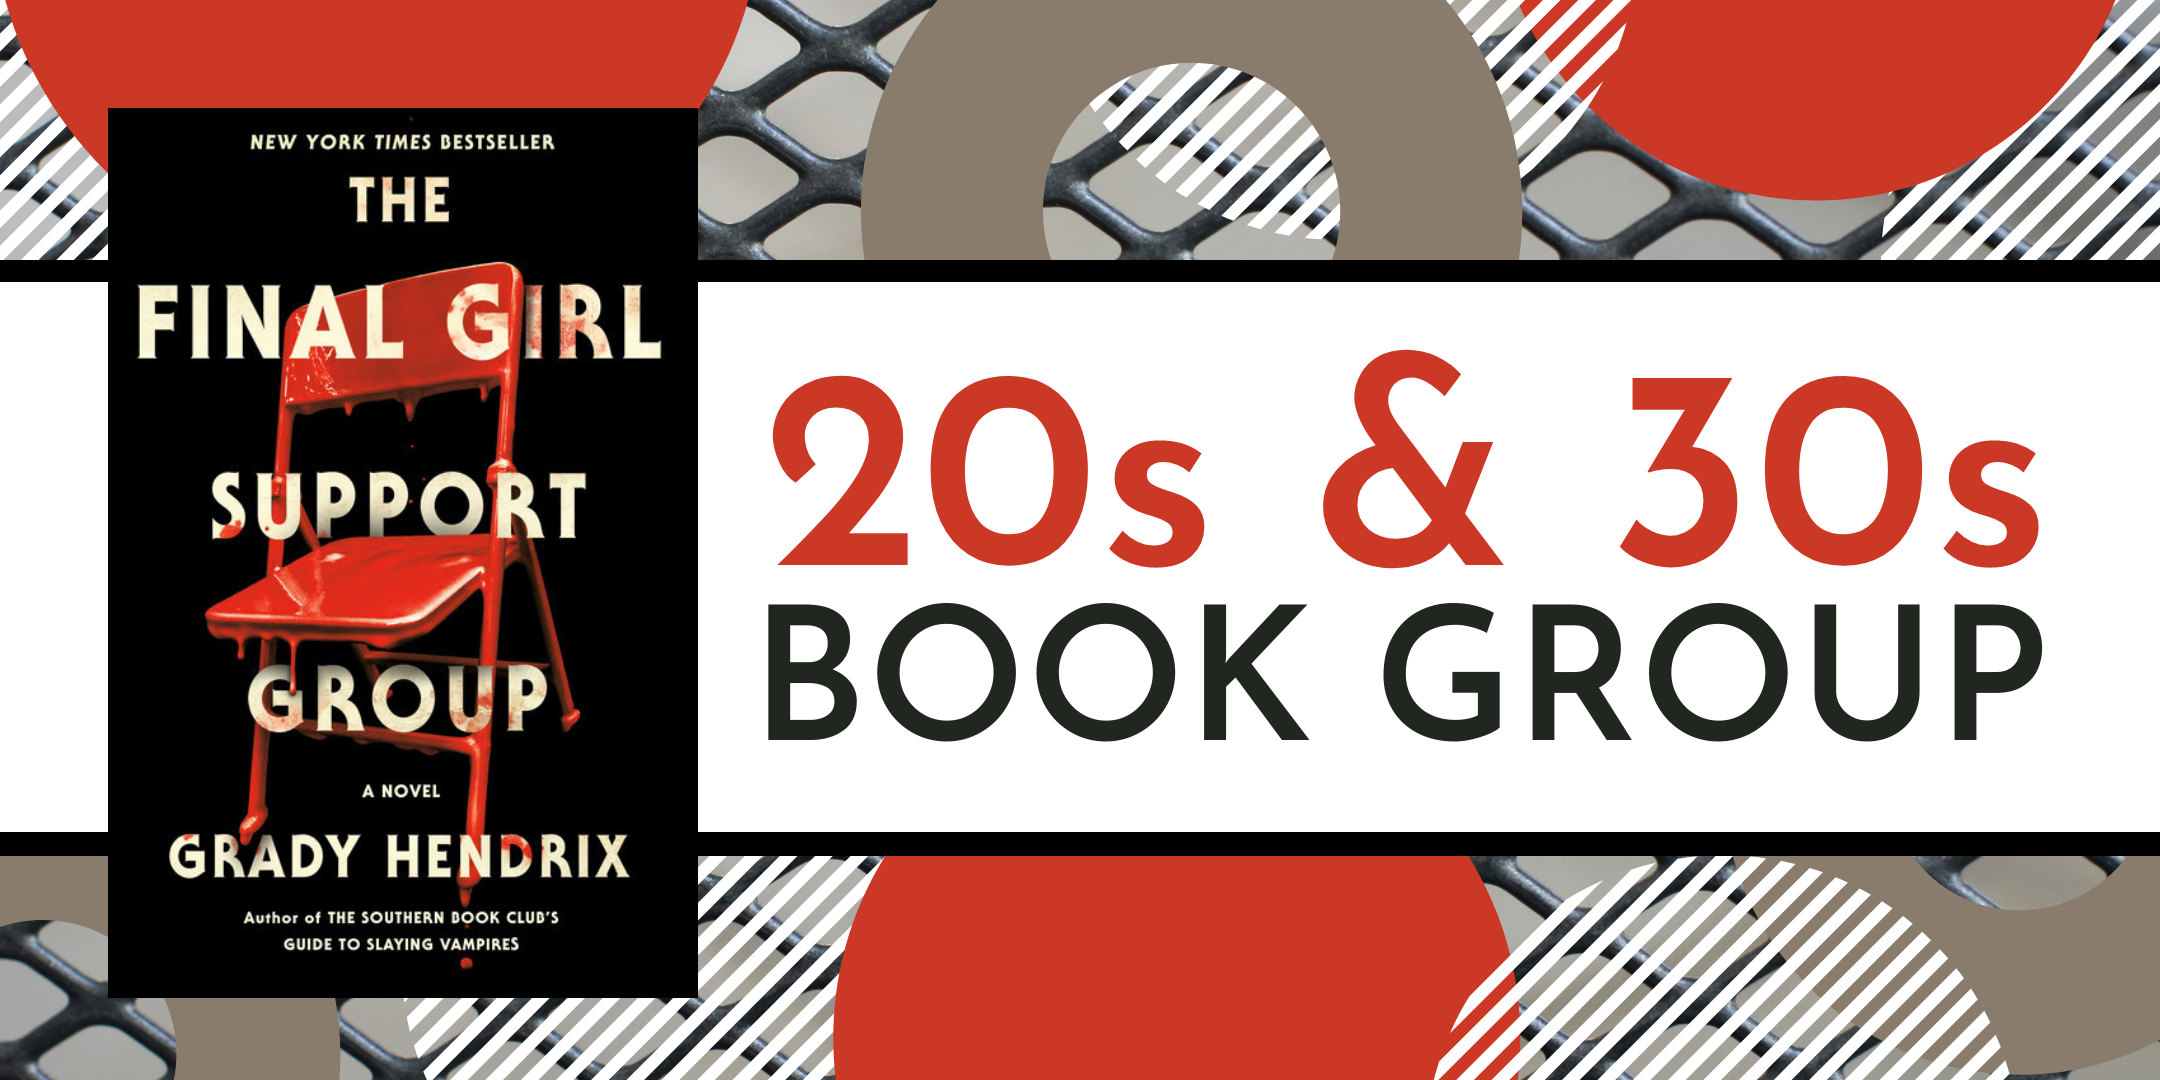 Image of "20s & 30s Book Group: The Final Girl Support Group"